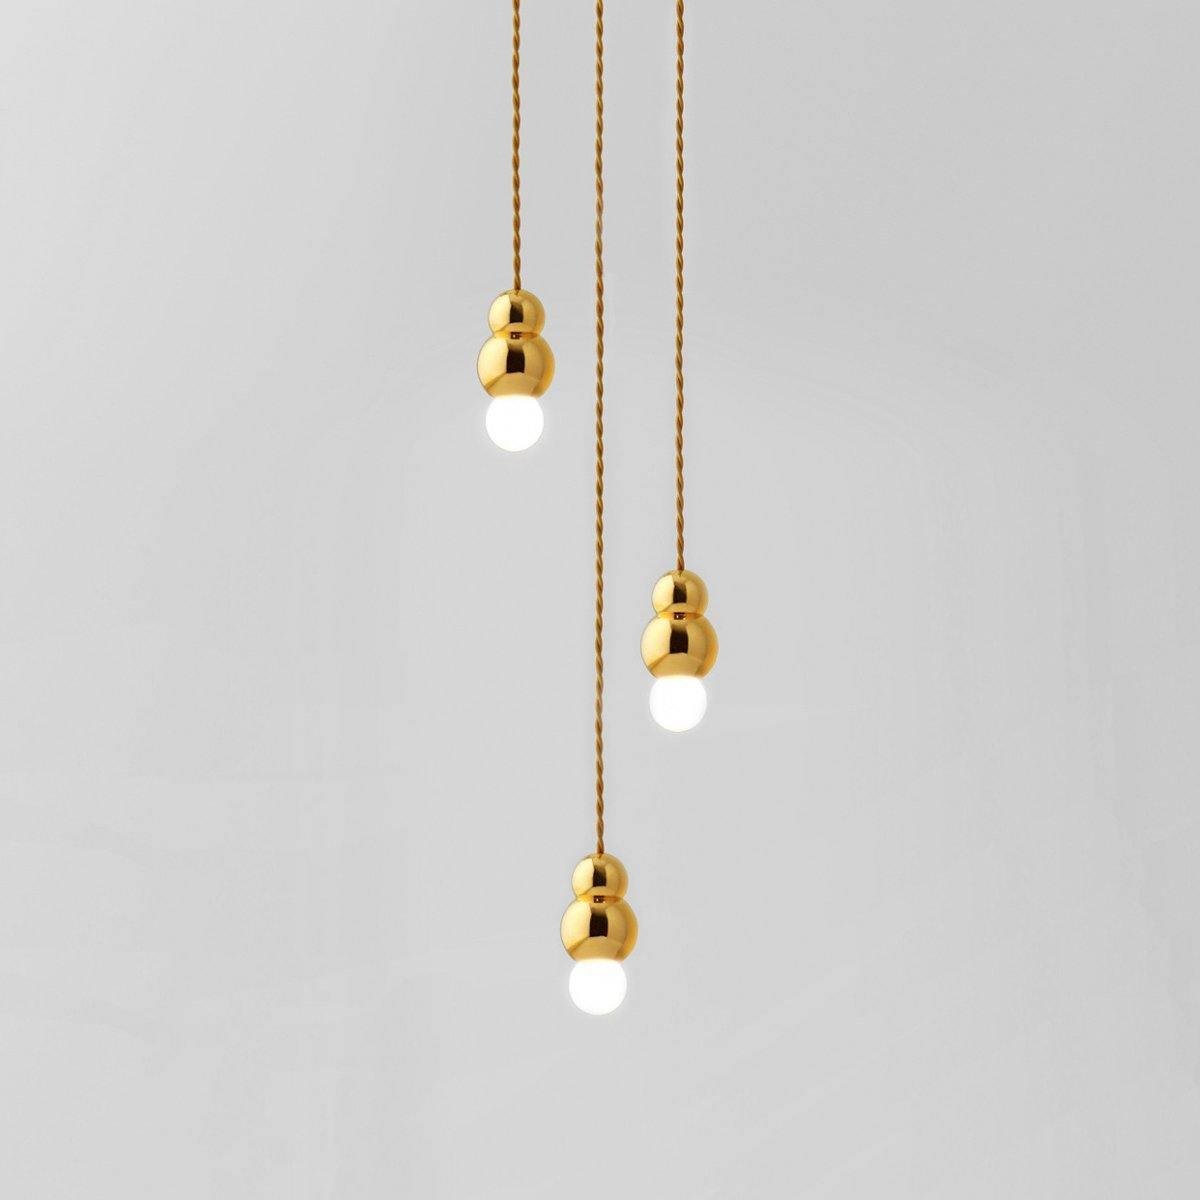 Gold Ball Pendant Light Series with 3 Heads, Adjustable Flex Cord, and Dimensions of ∅ 3.9" x H 6.81" (10cm x 17.3cm)